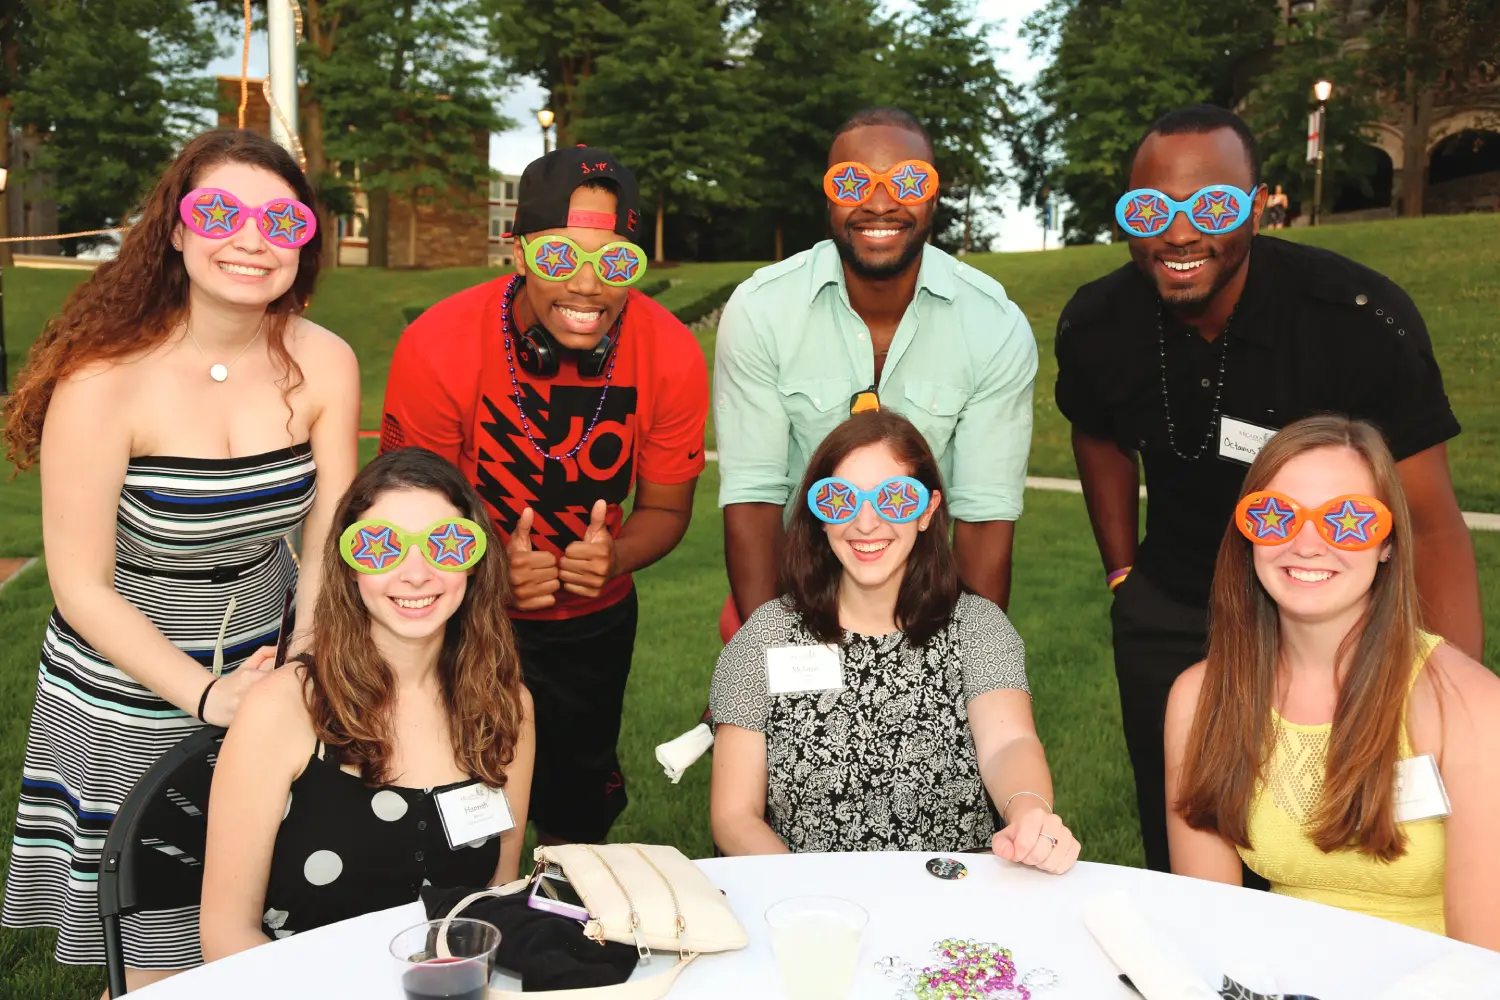 Several alumni students wearing colorful funny glasses during the picnic